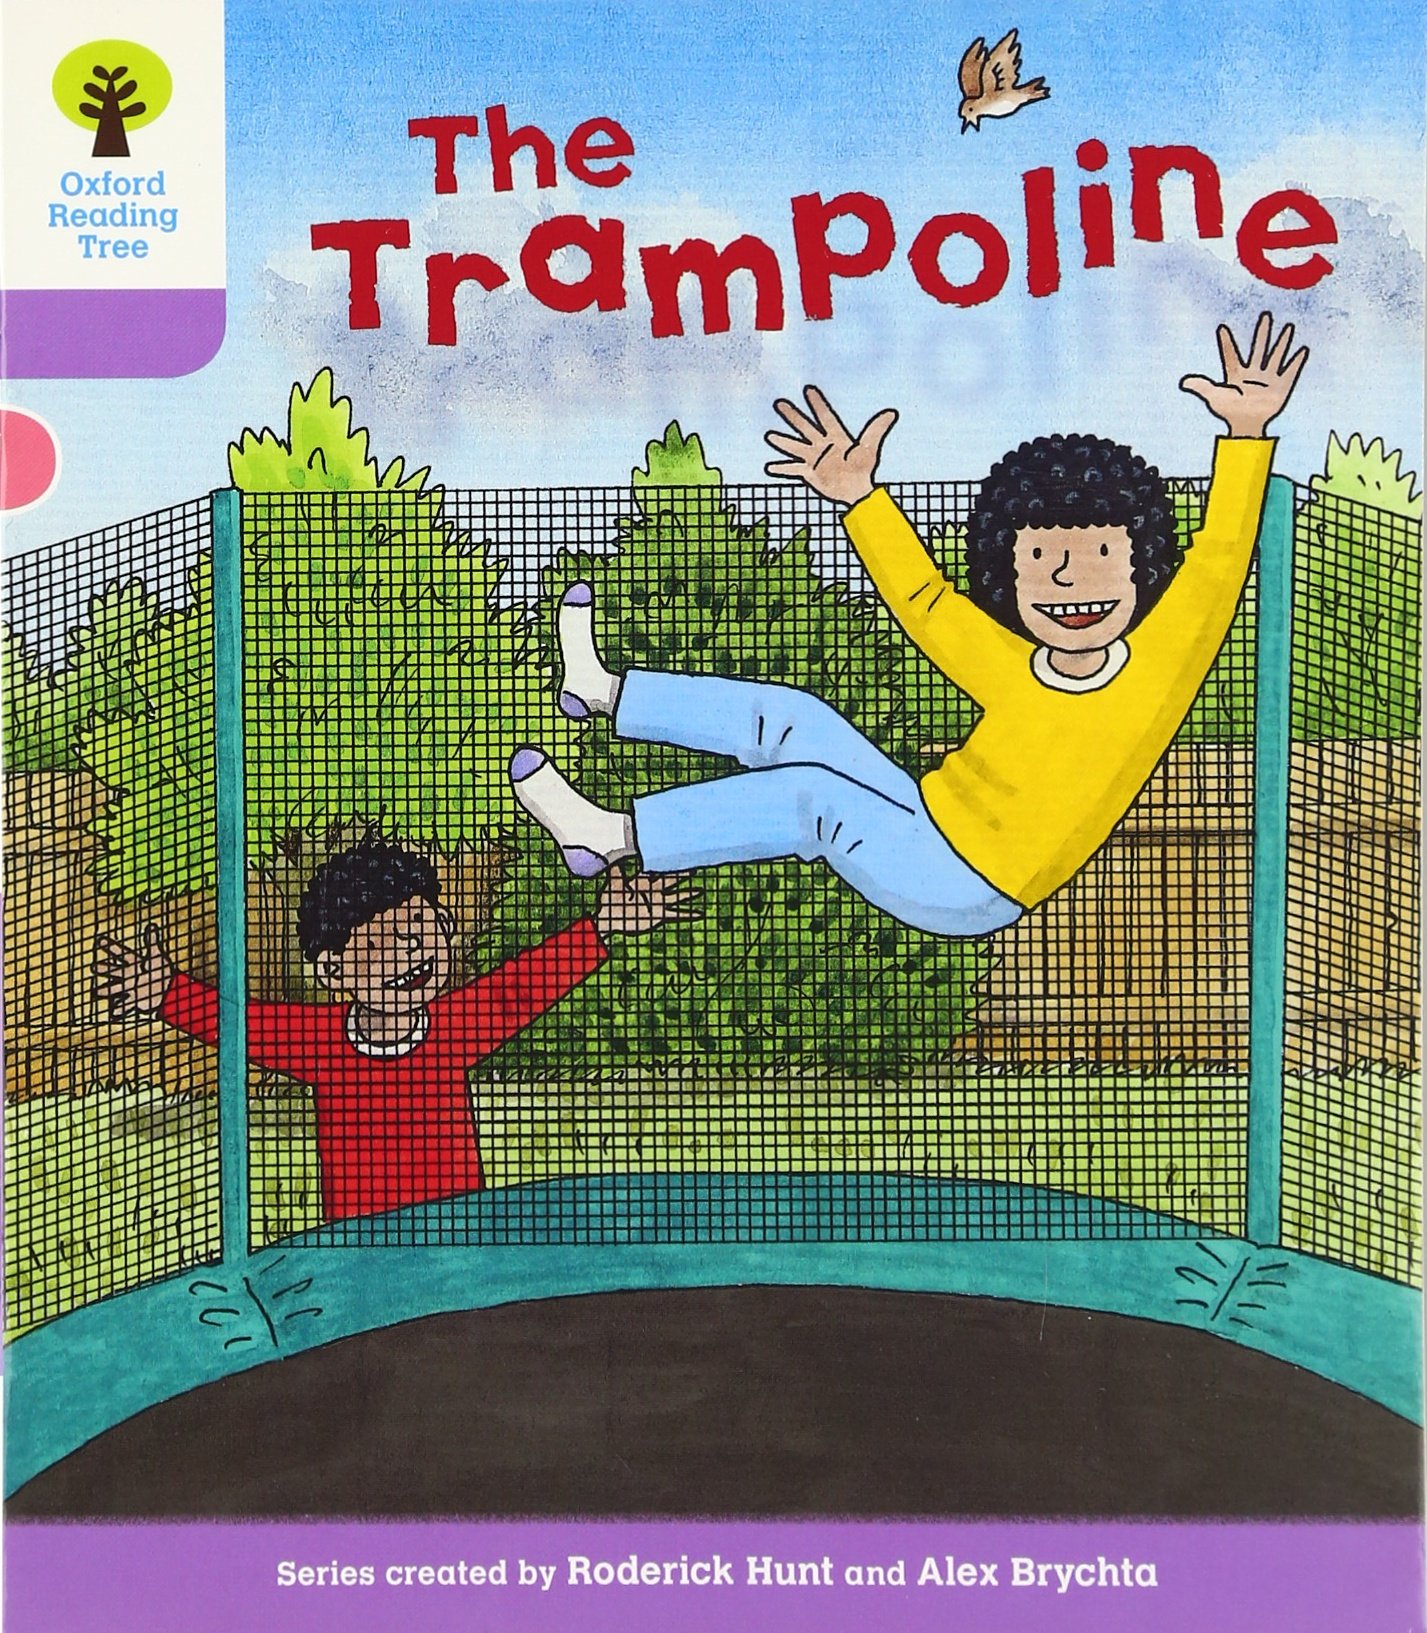 Oxford Reading Tree: Level 1+ - The Trampoline | Roderick Hunt